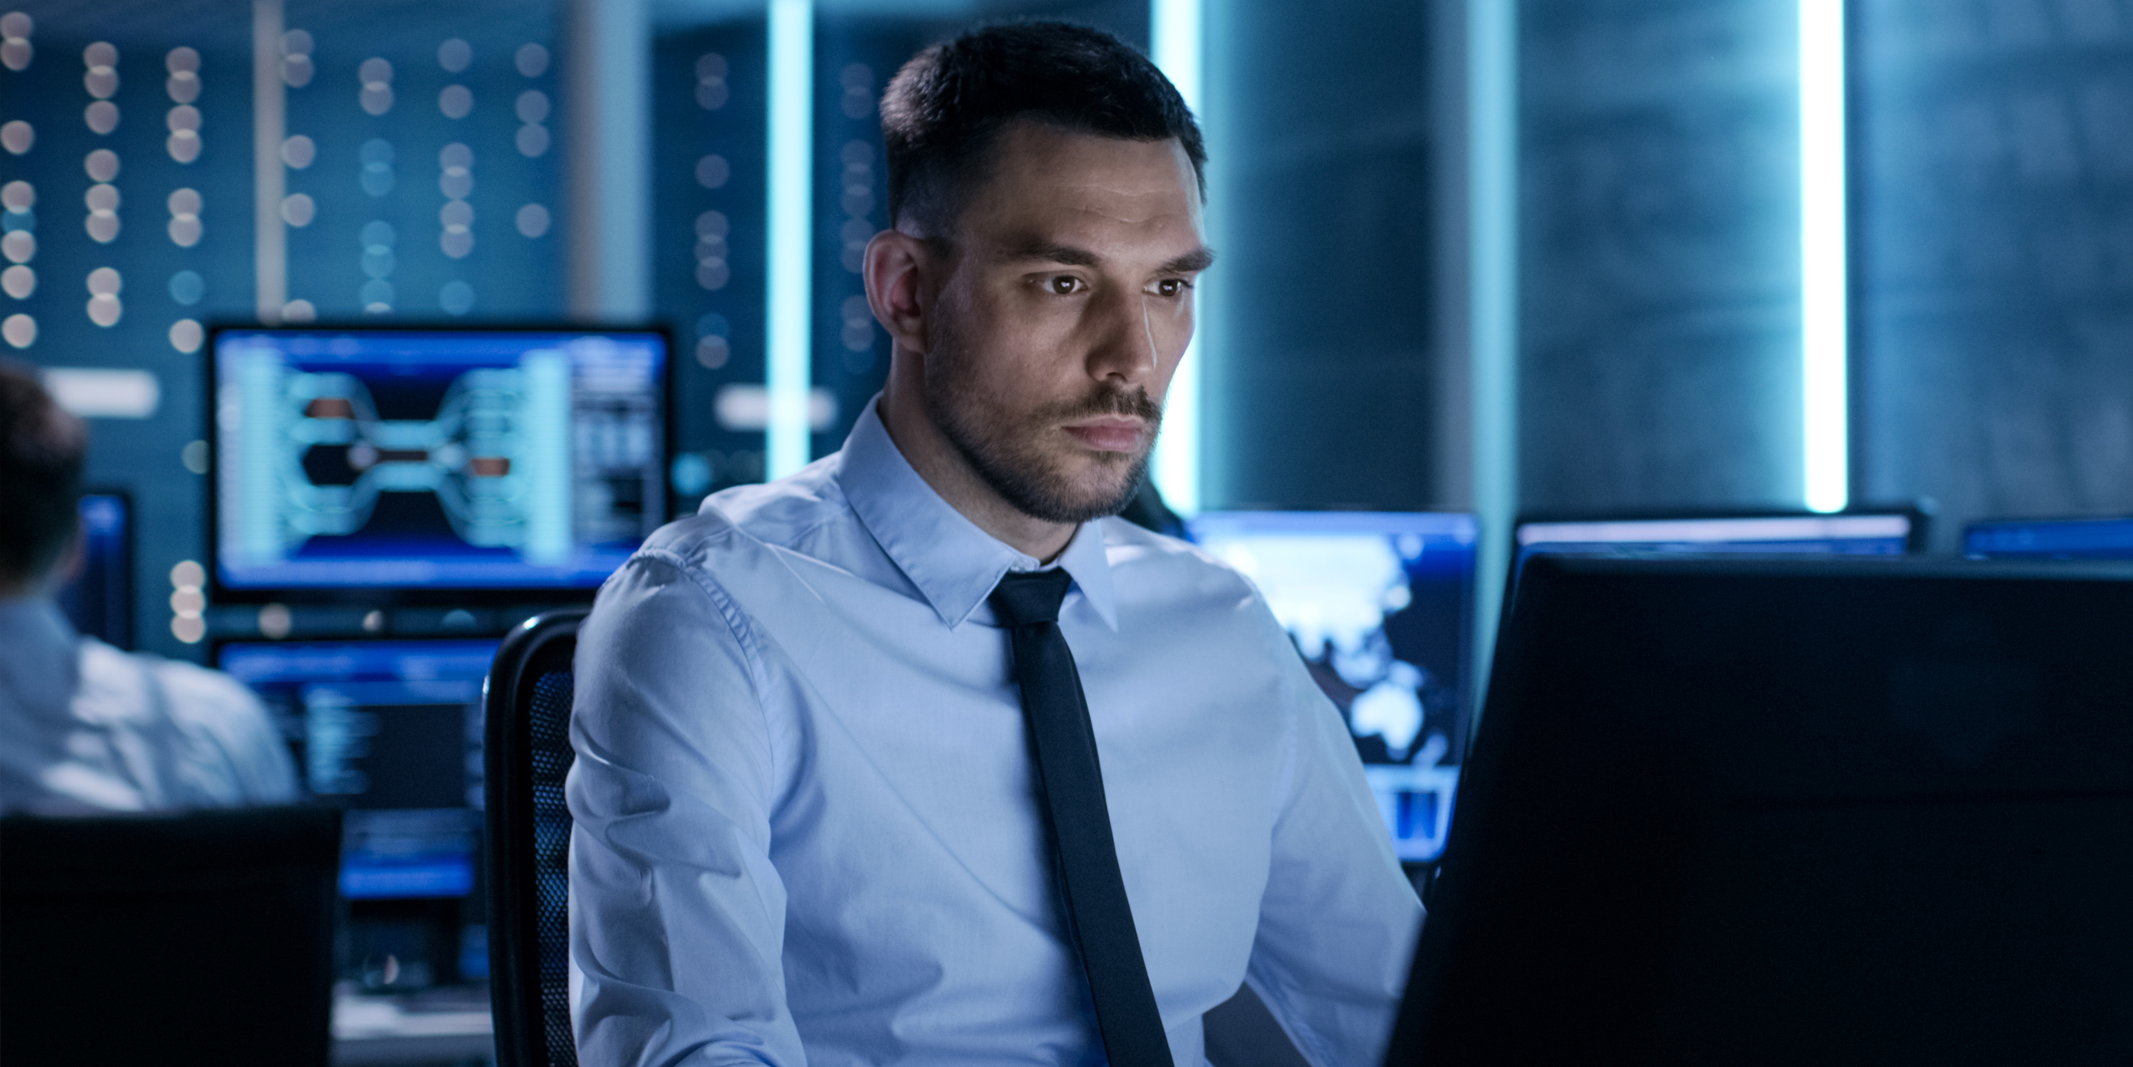 cyber security employee reviewing company data